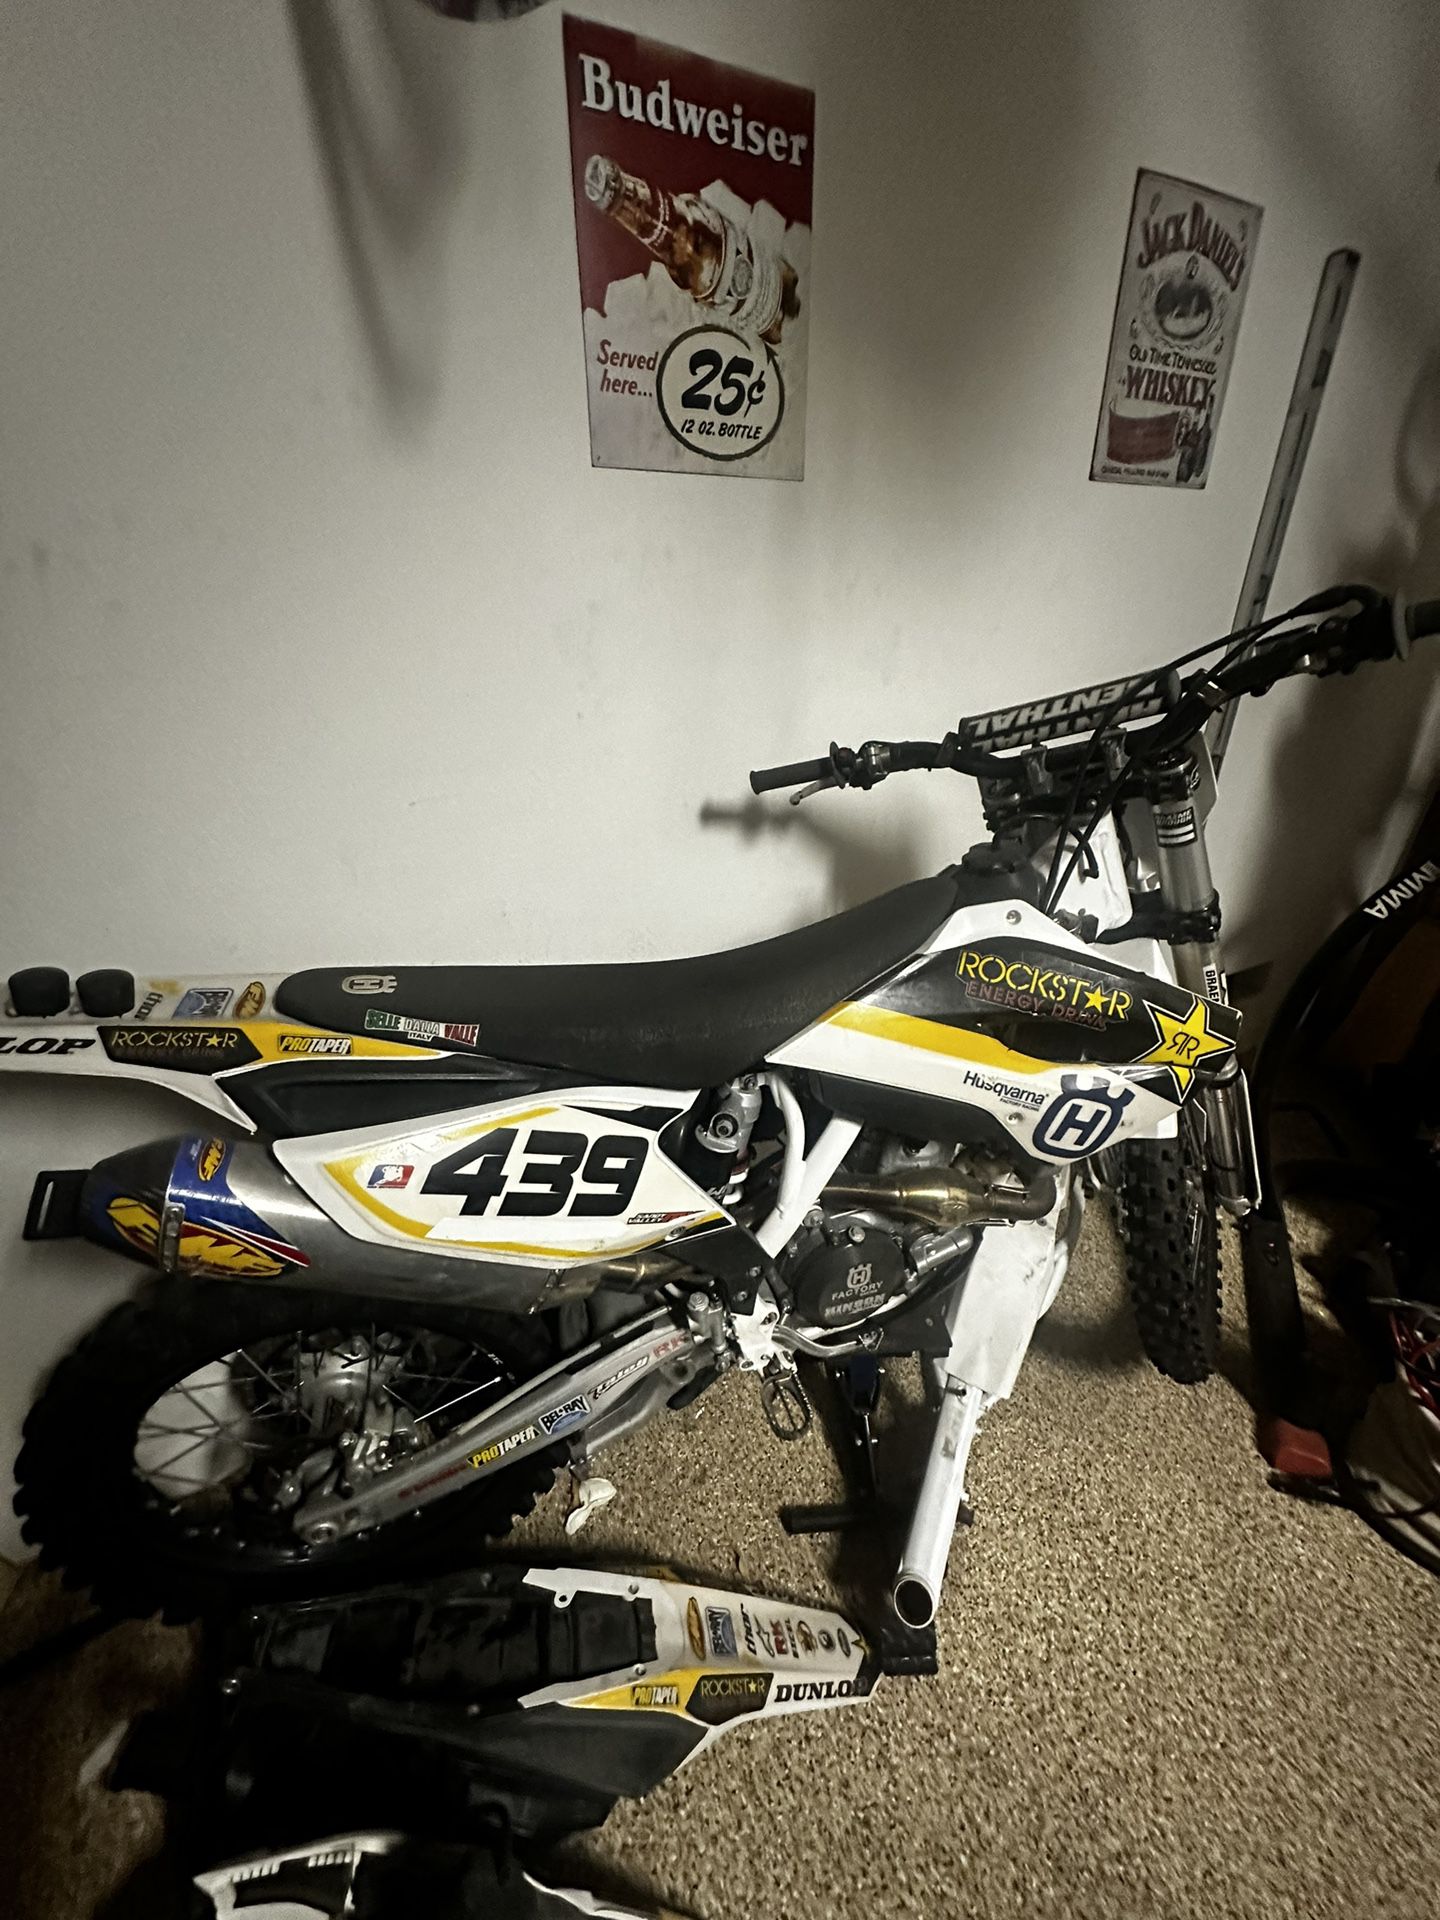 Dirt Bike 450 Four Stroke 2015 Husqvarna Rockstar Edition A Must See Only 61 Hours